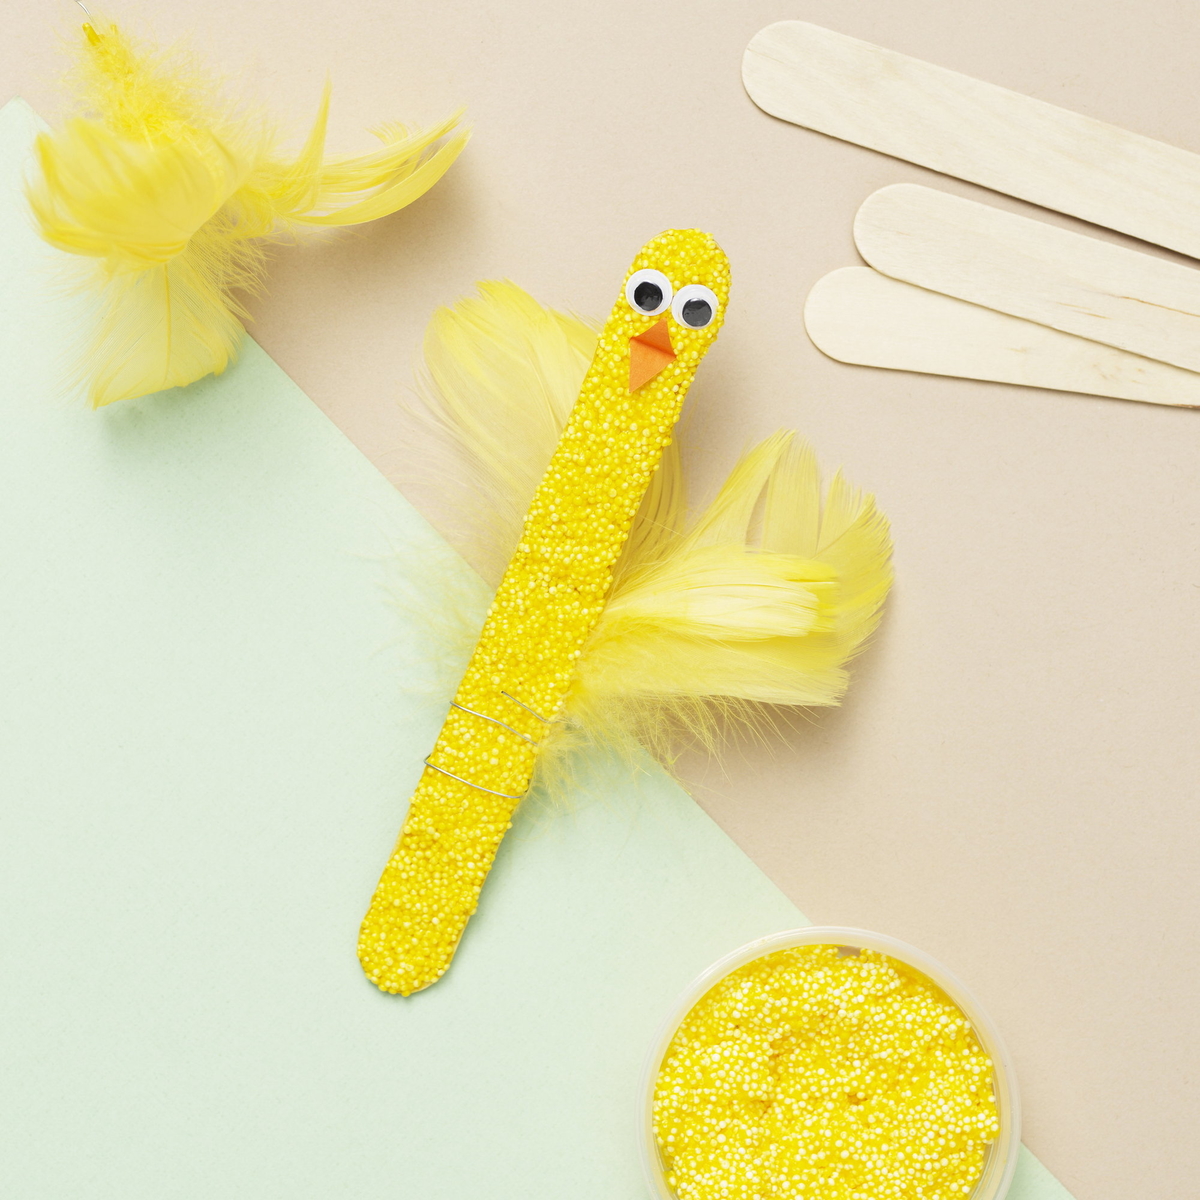 Craft a simple Easter chick